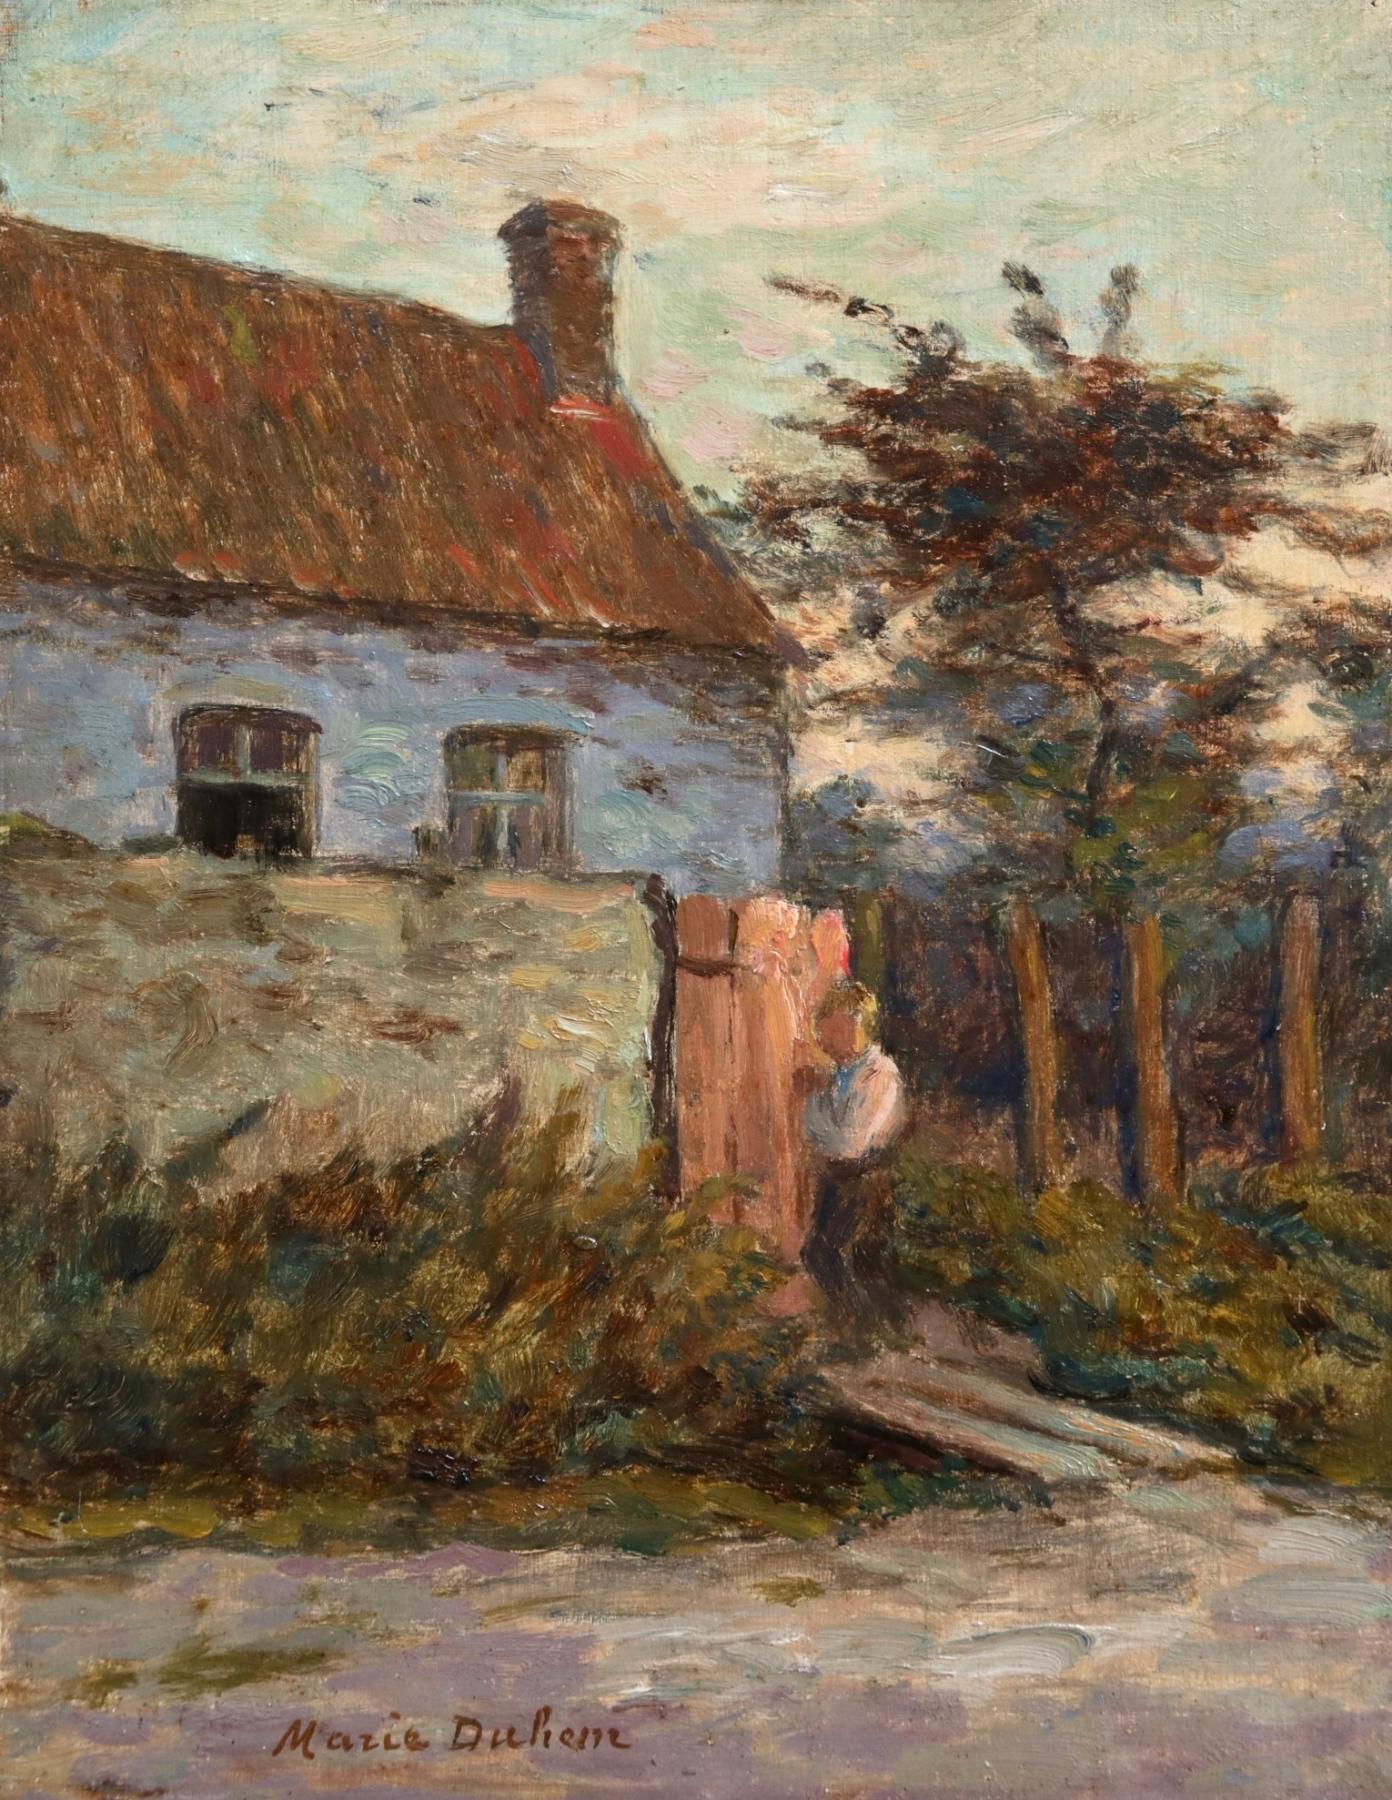 A lovely oil on panel circa 1905 by French Impressionist painter Marie Duhem depicting a figure standing beside a gate by a cottage as the sun sets behind the trees. Signed lower right.

Dimensions:
Unframed: 9.5"x7.5"

Provenance:
The collection of